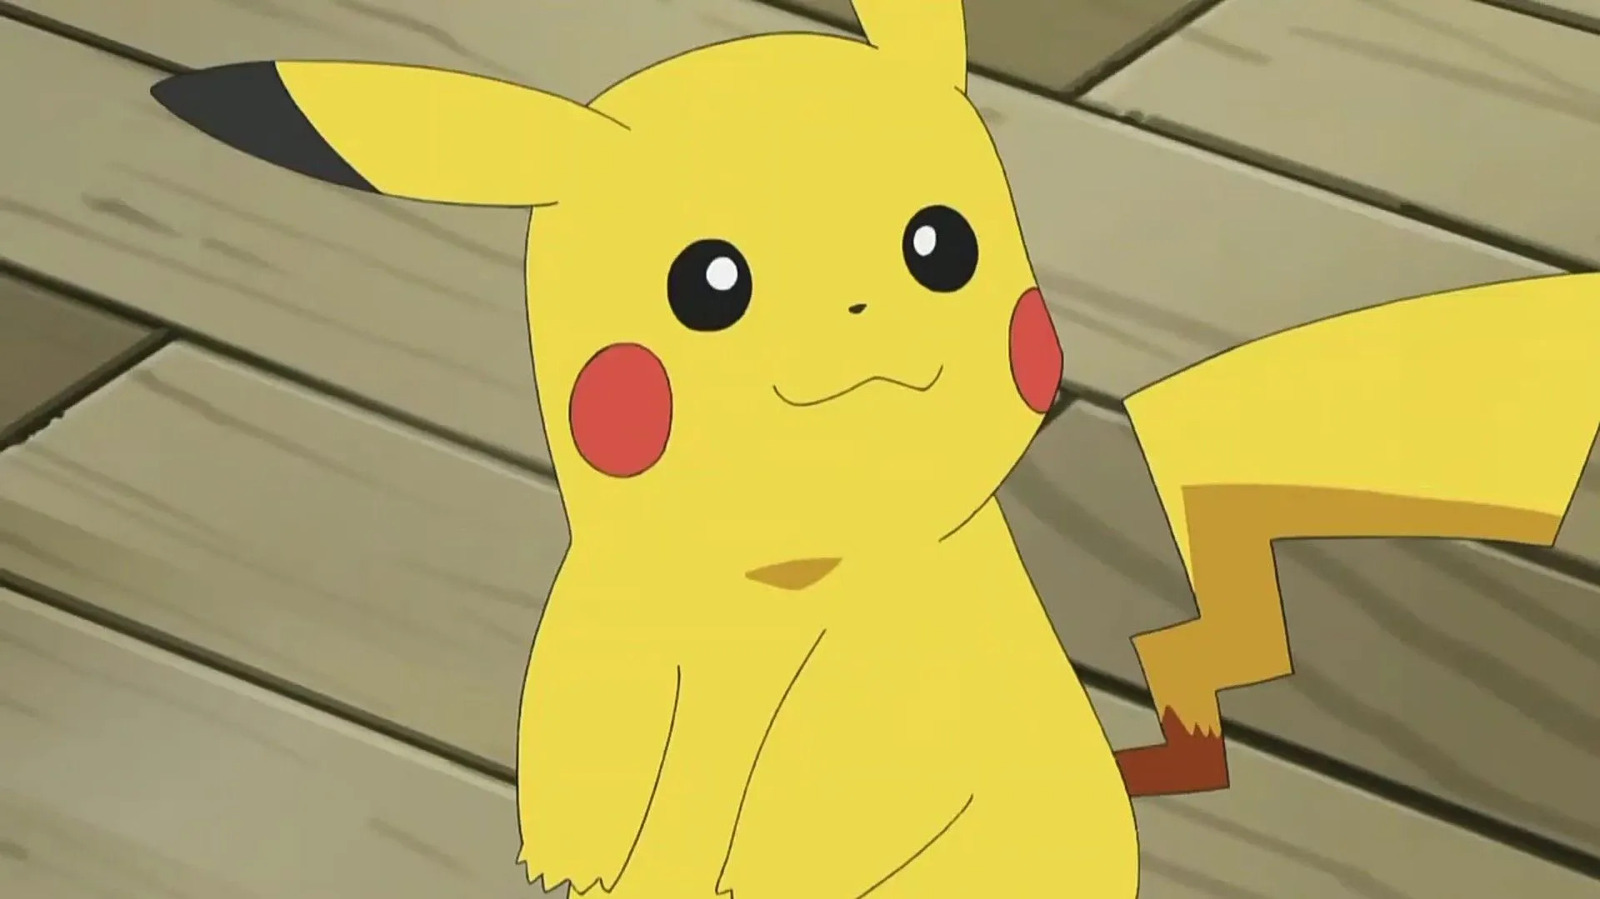 New Pokémon anime will still have a Pikachu protagonist without Ash Ketchum